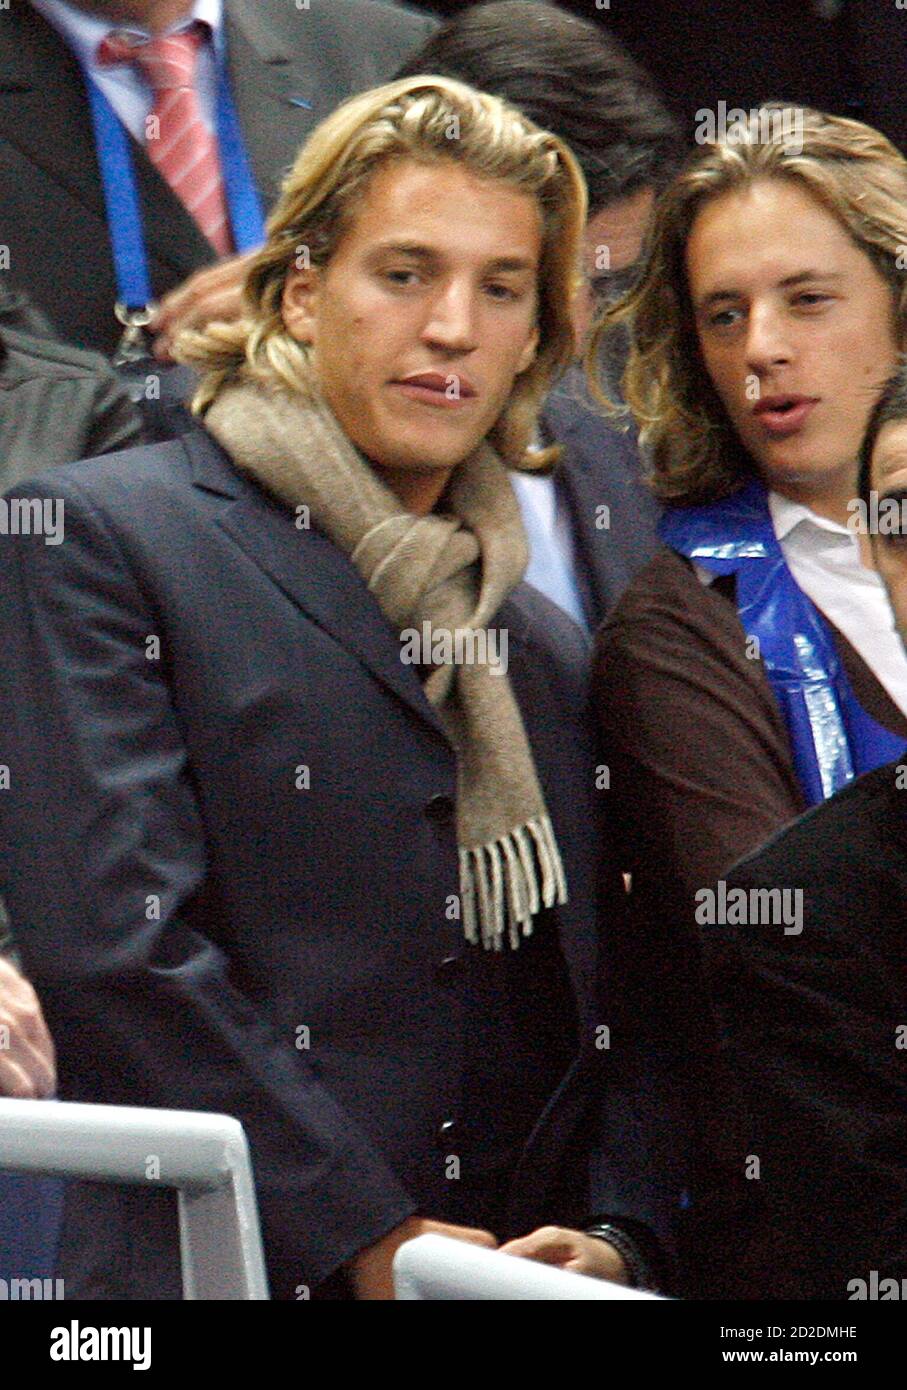 Jean Sarkozy, a son from the first marriage of France's President Nicolas  Sarkozy attend the opening ceremony of the 2007 Rugby World Cup before the  match between France and Argentina at the